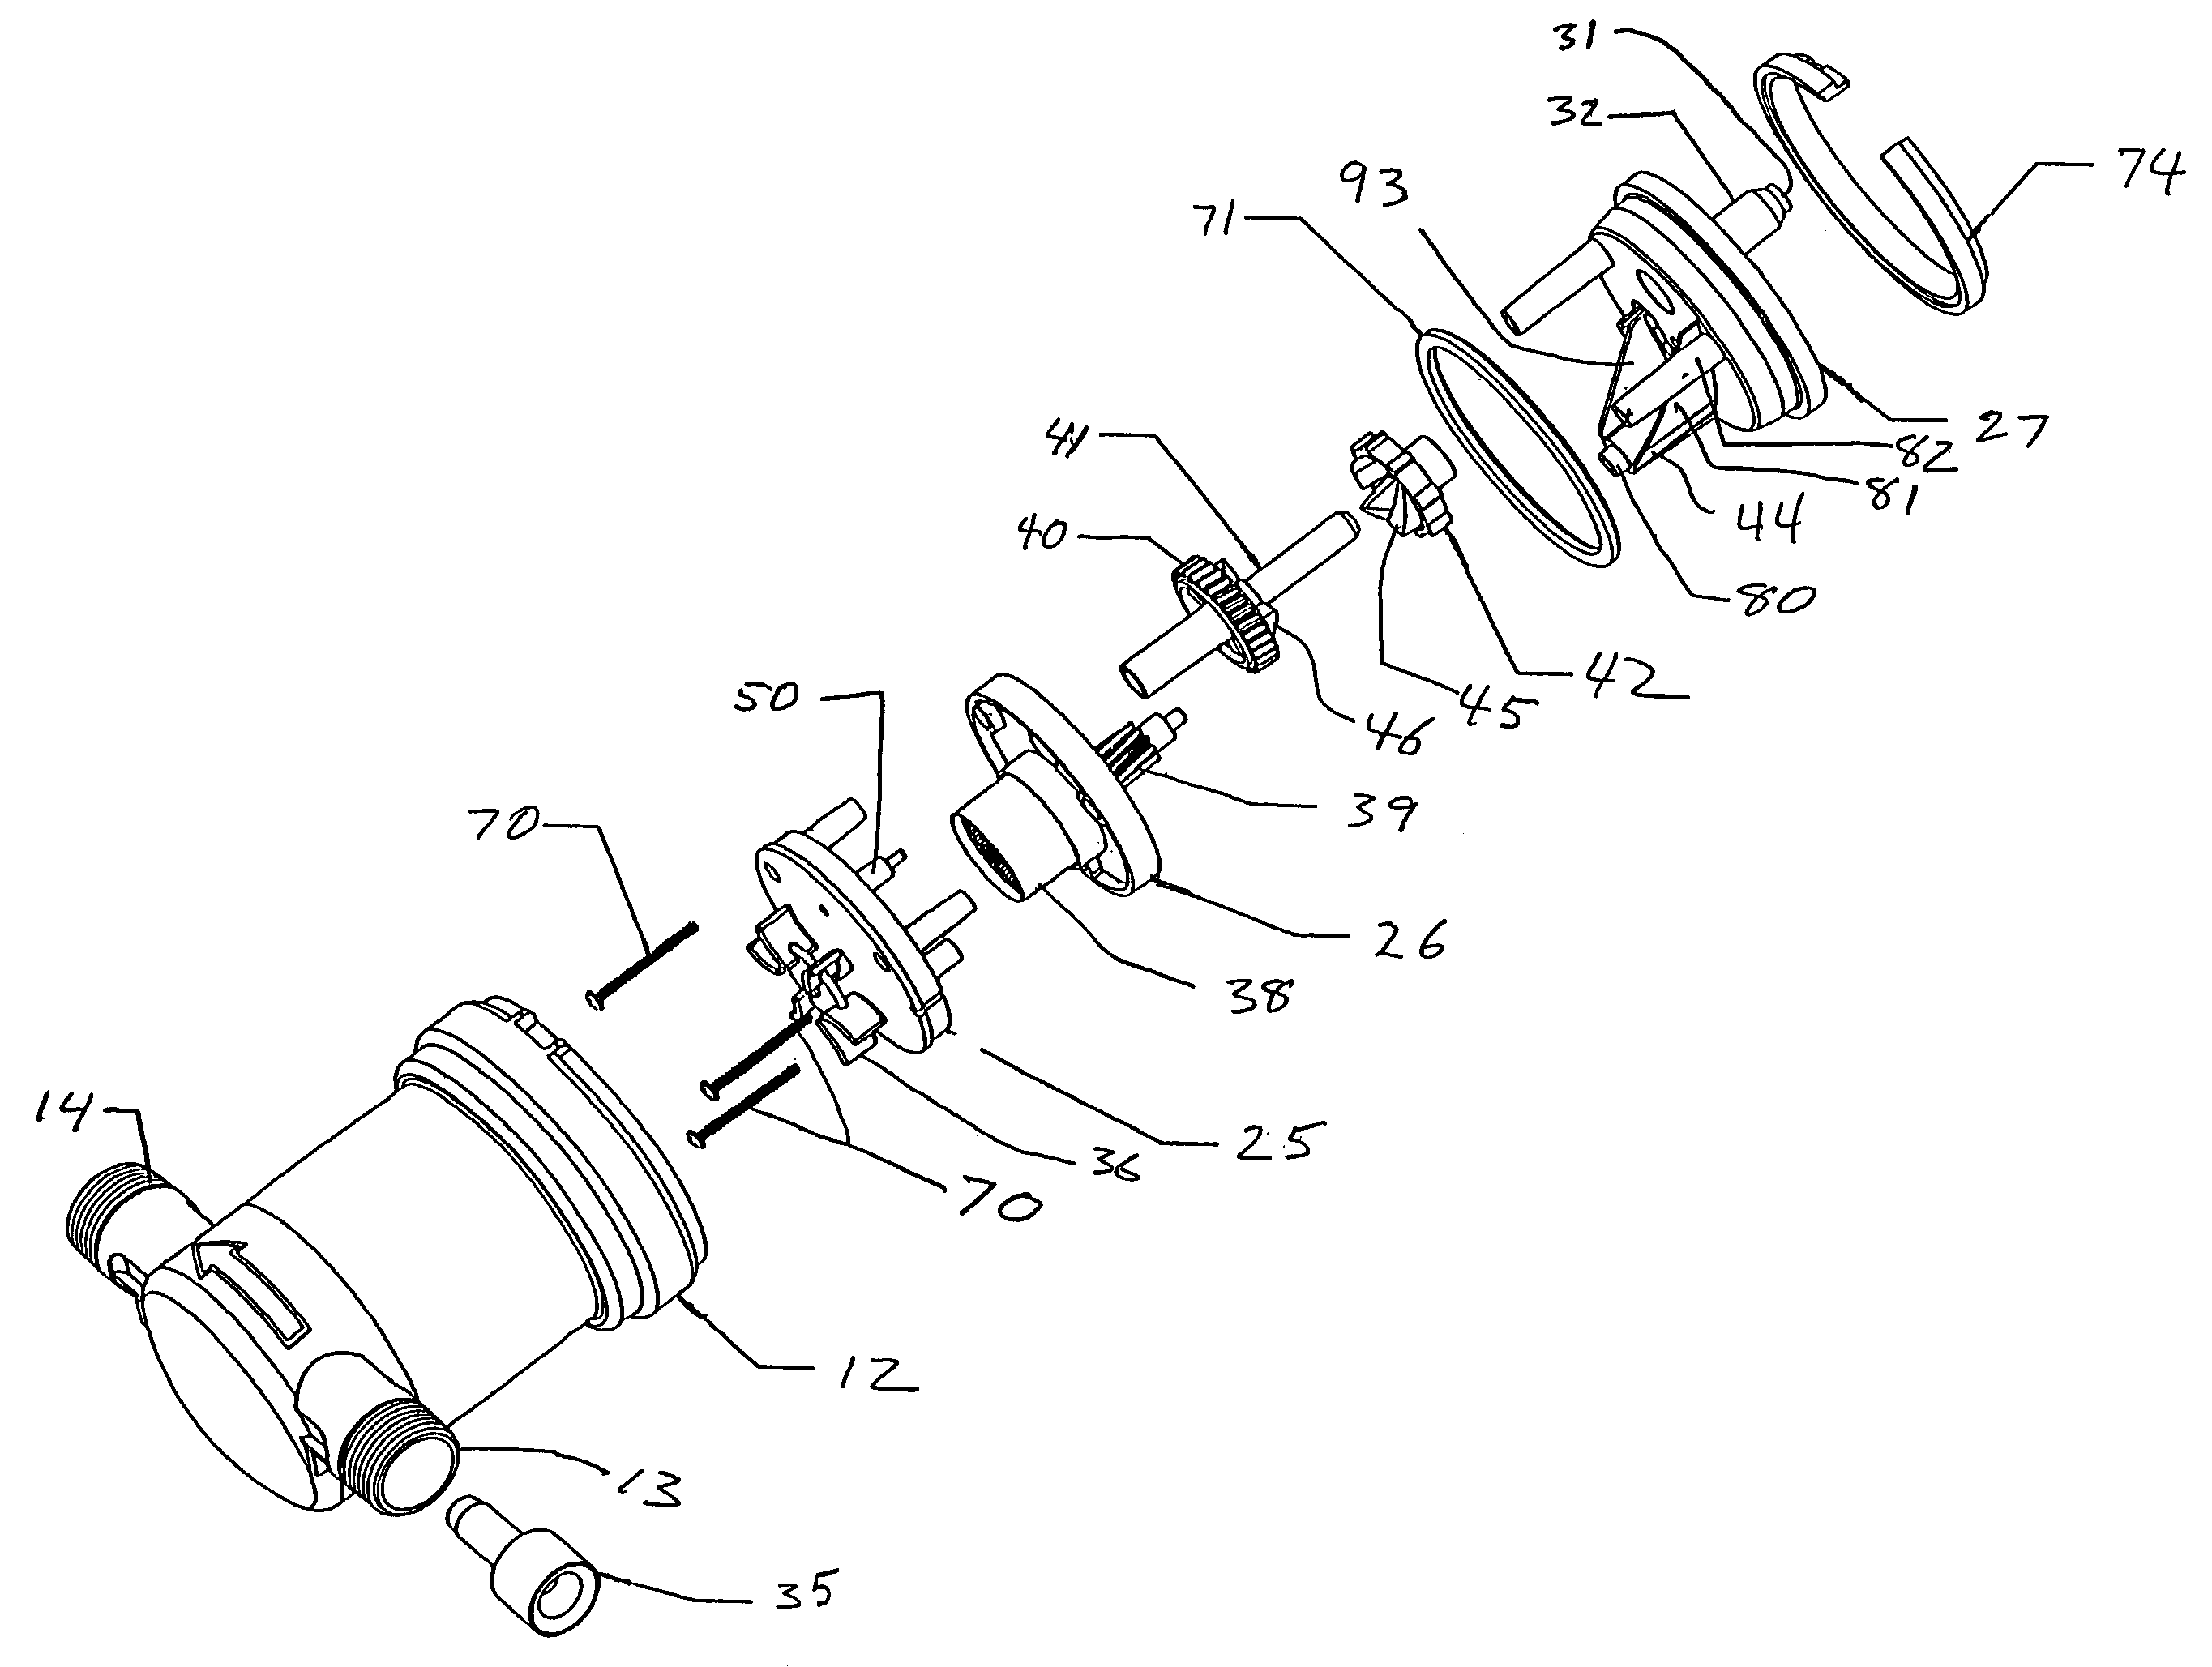 Apparatus for adding fertilizer to water in an underground sprinkling system and fertilizer therefor